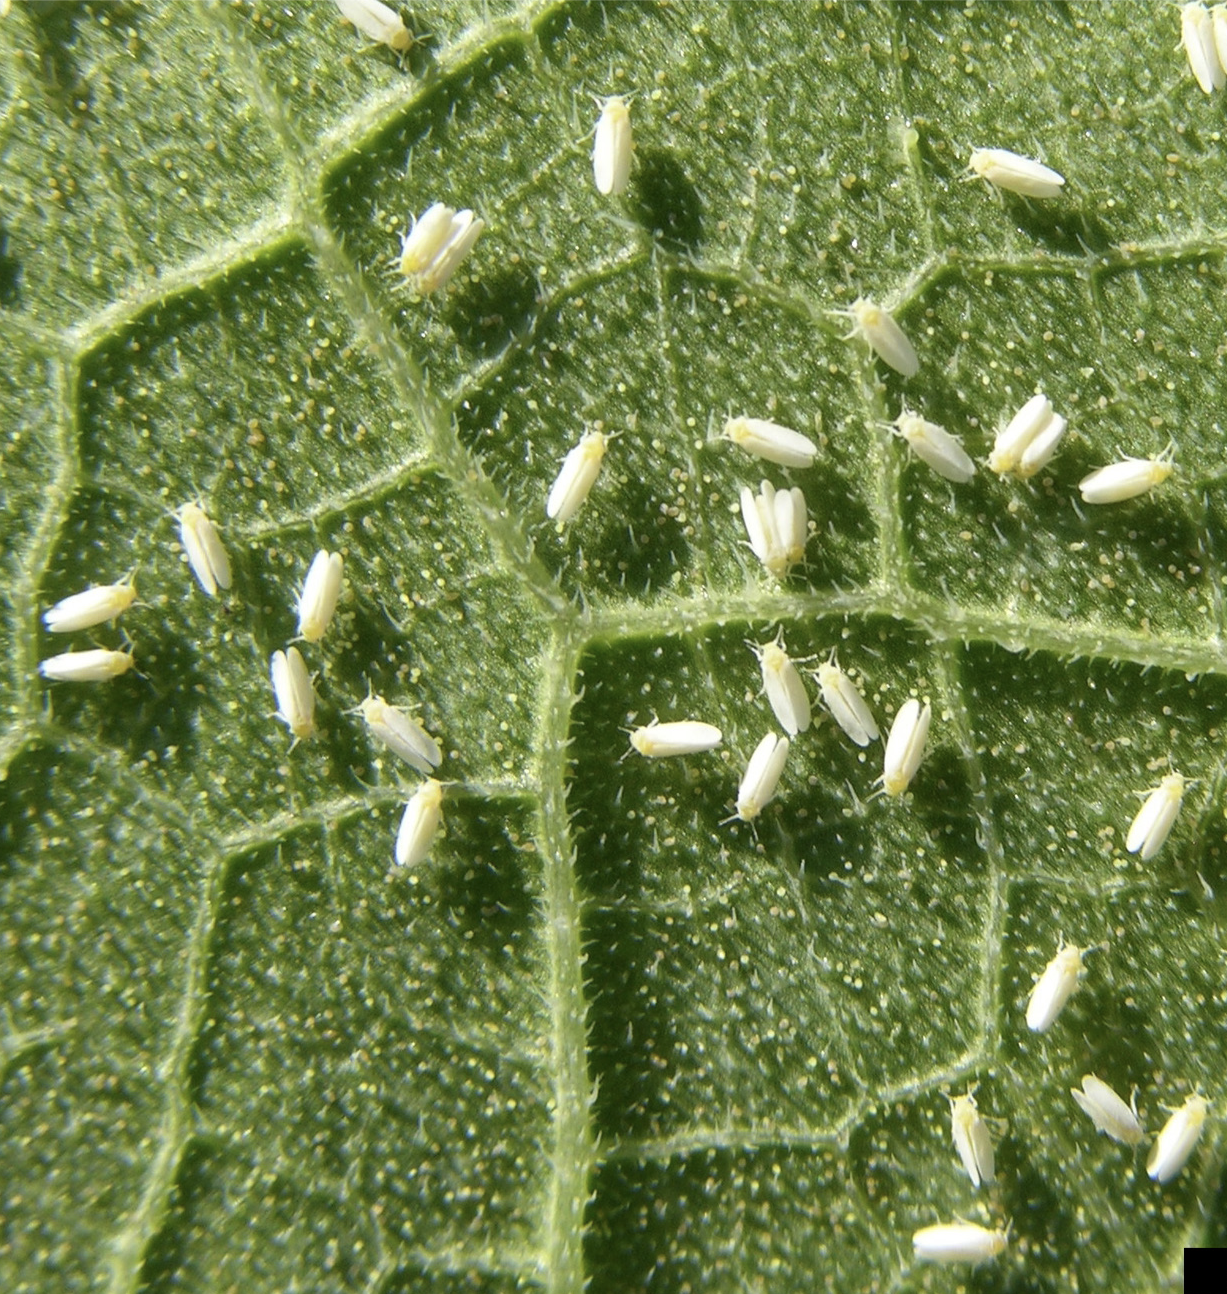 Silverleaf whitefly in adult stage